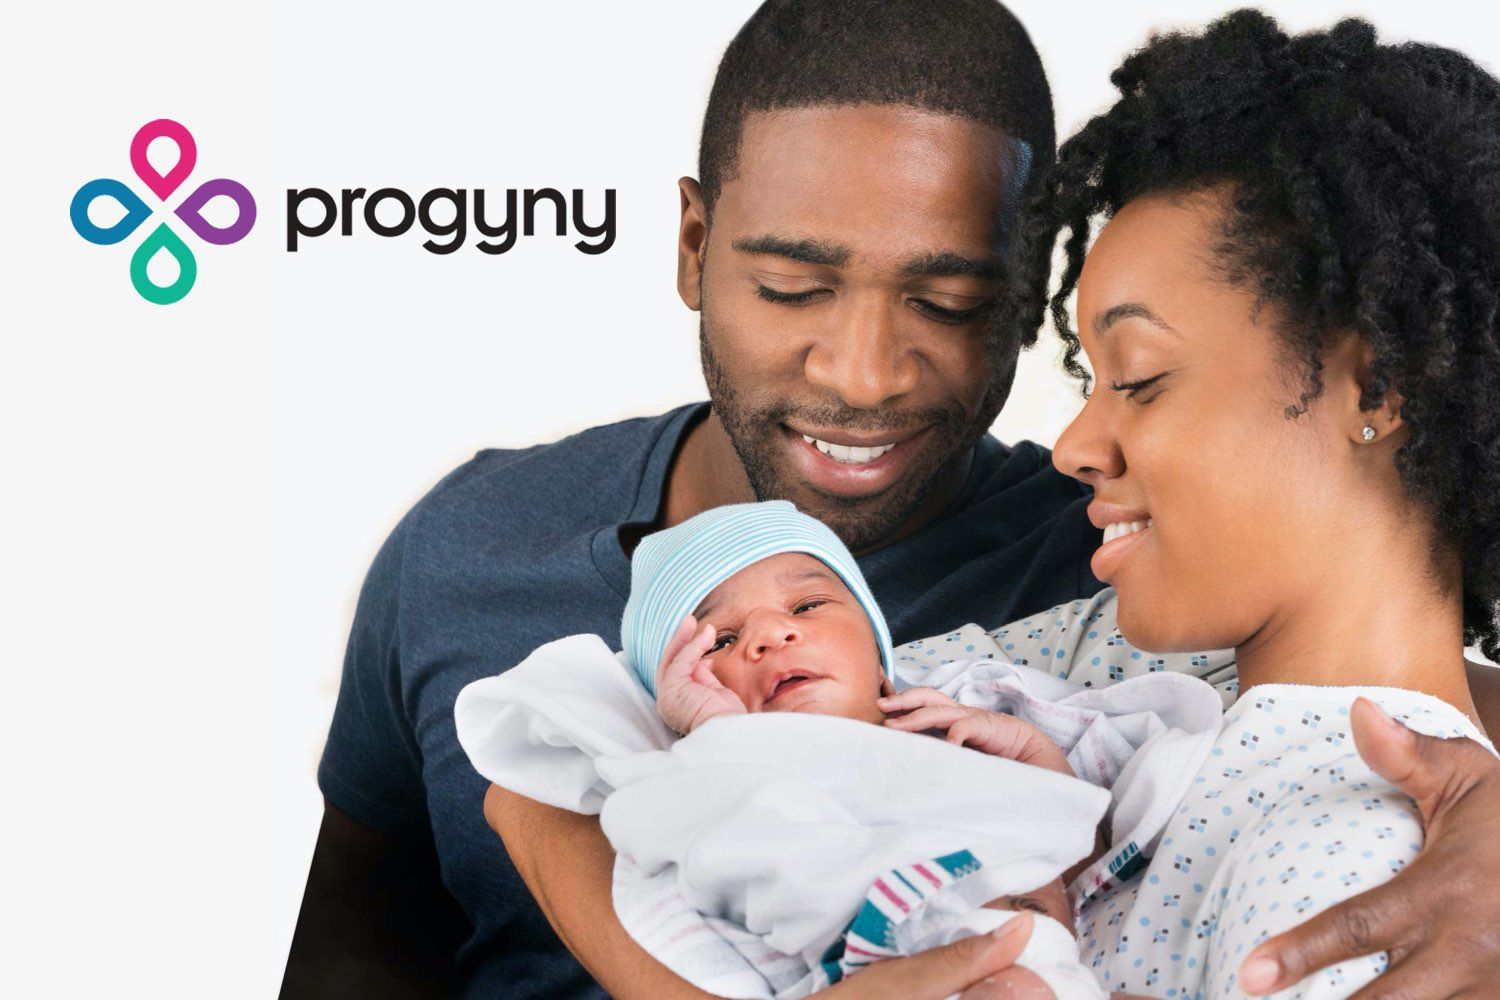 Progyny helping people achieve the dream of parenthood